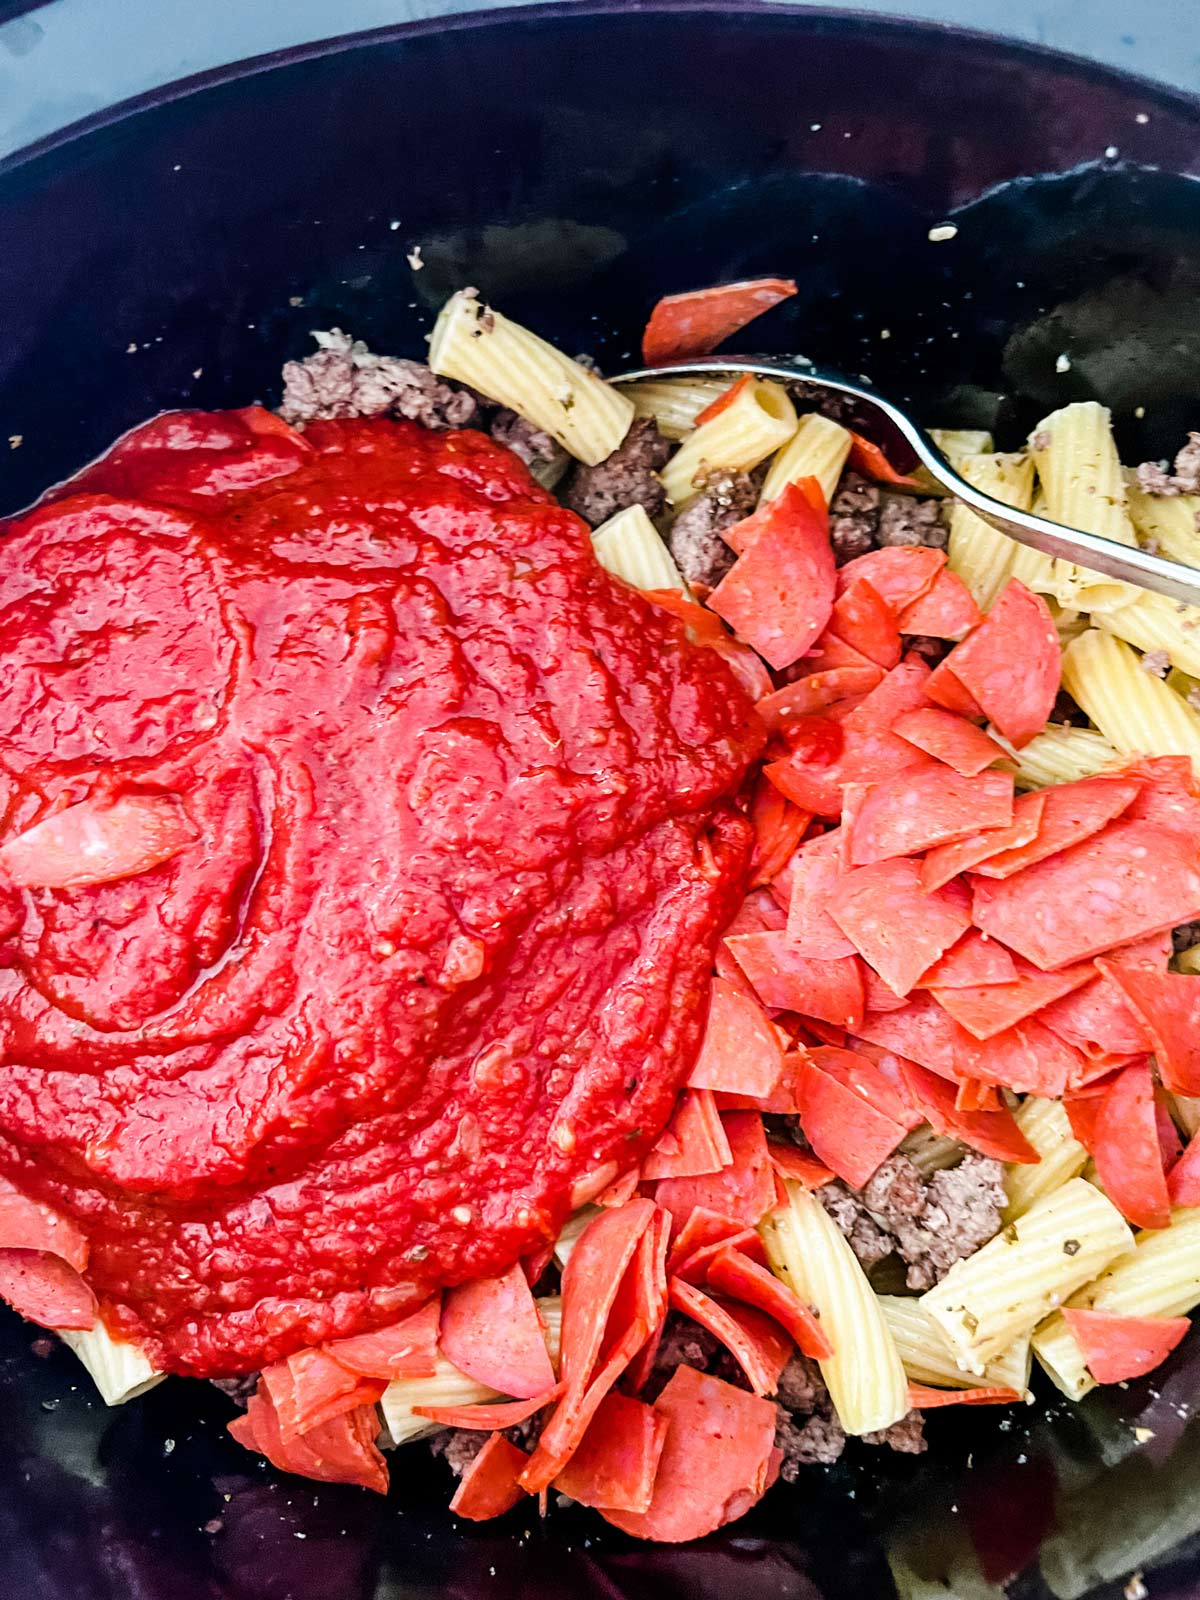 Marinara and chopped pepperoni being stirred into ground beef and pasta in a slow cooker.